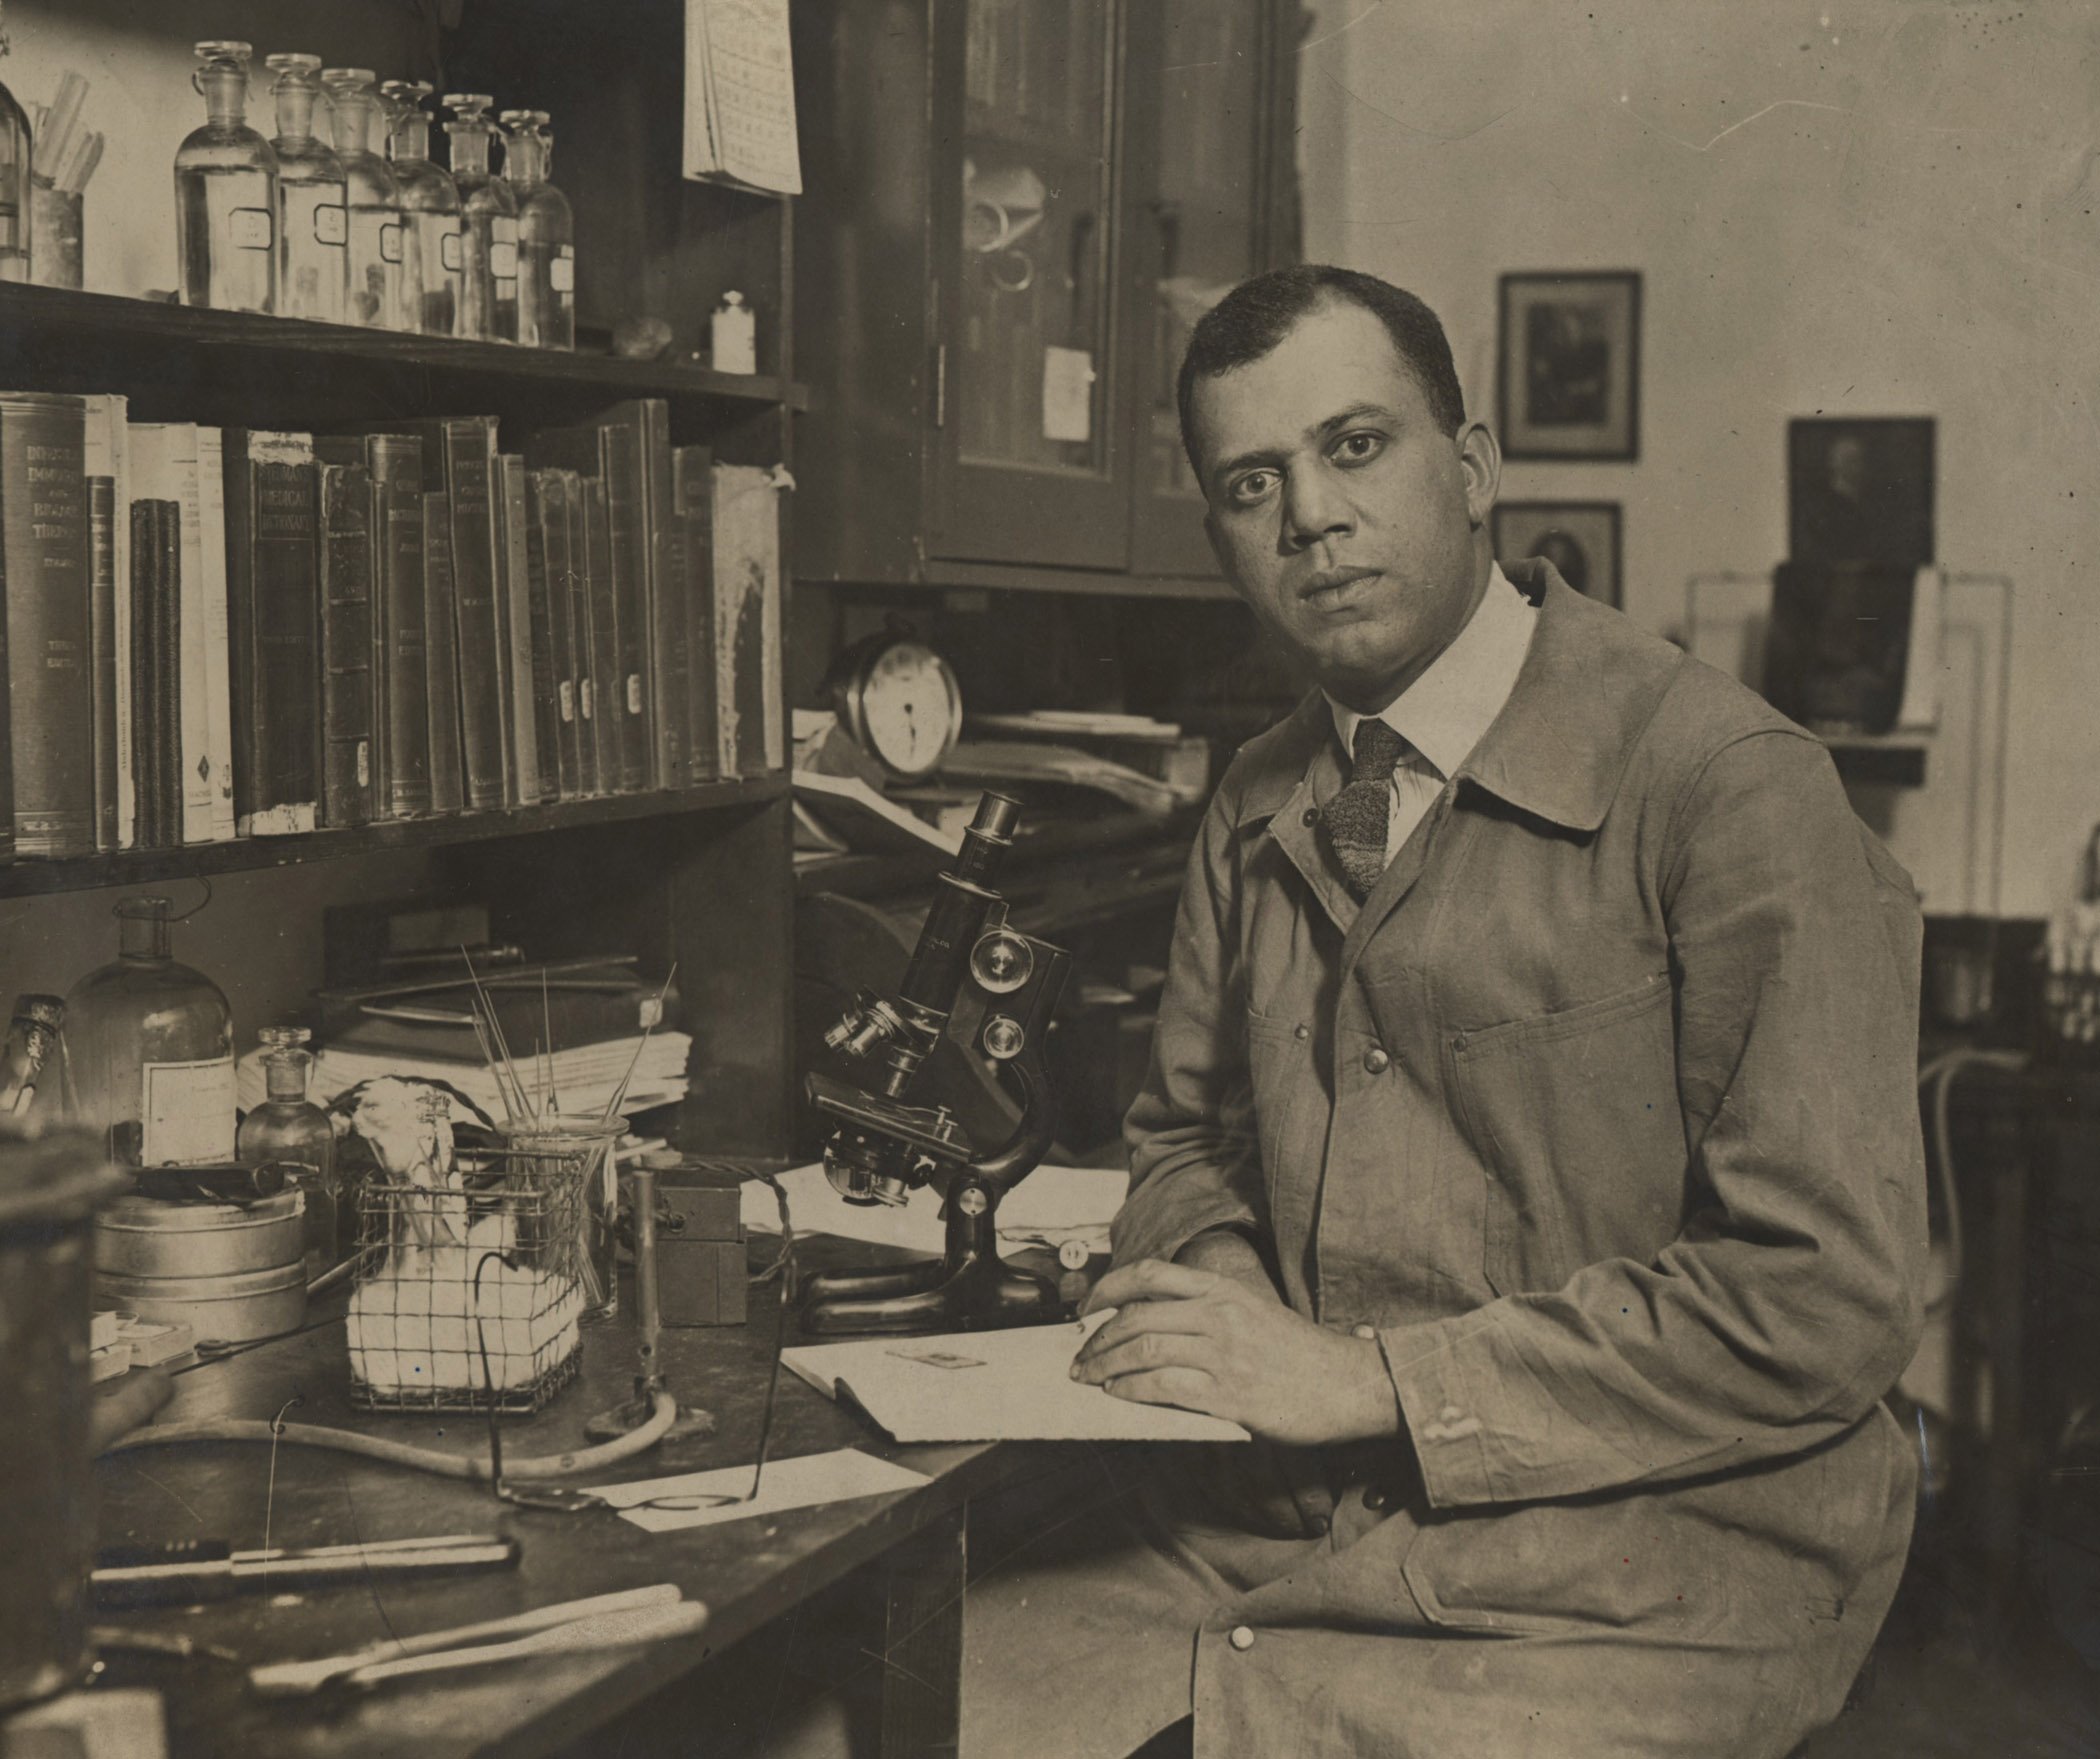 Photograph of Dr. Julian Herman Lewis seated in front of a microscope in his lab.